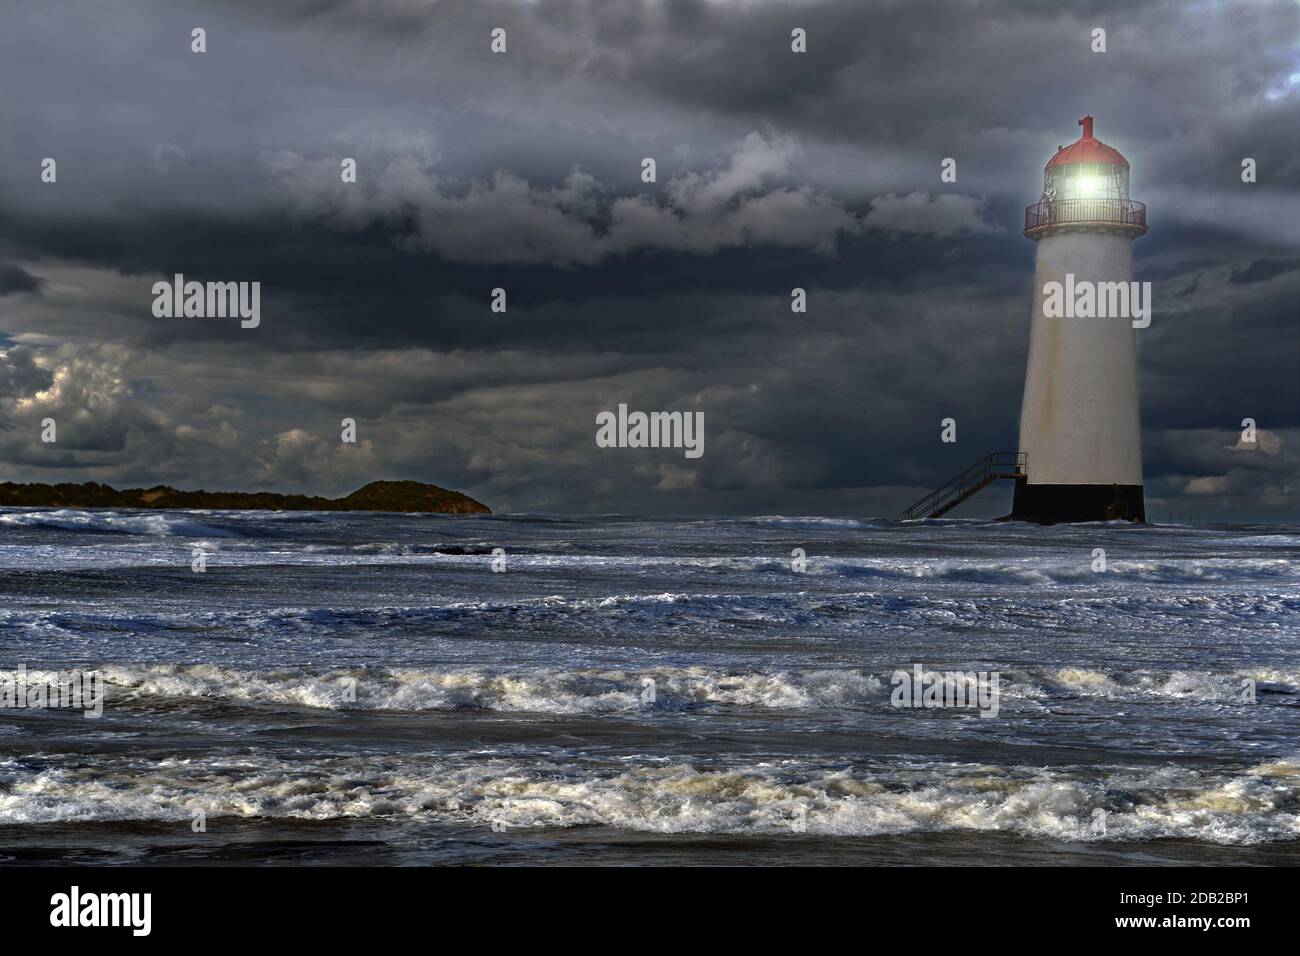 Point of Ayr Lighthouse, a disused lighthouse in the Dee Estuary, has been brought back to life with the magic of Photoshop and added high water. Stock Photo